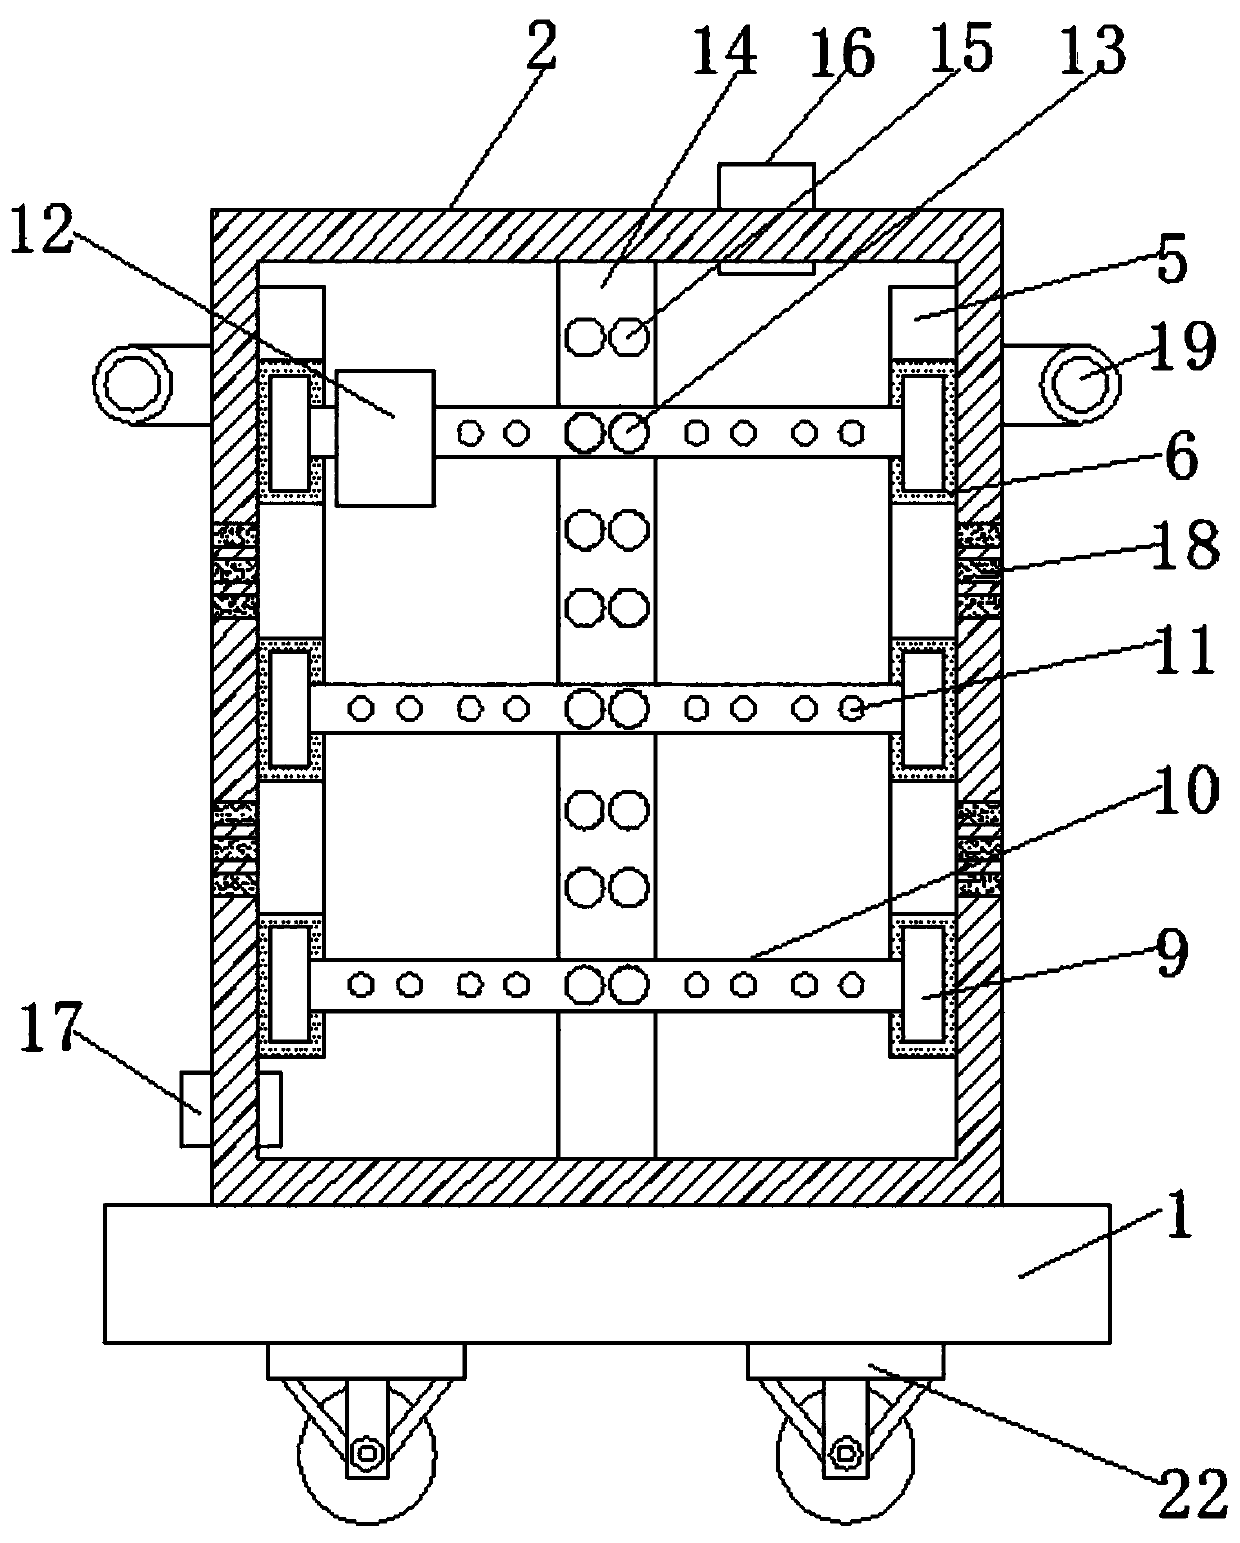 Secondary open-circuit protection device for current transformer